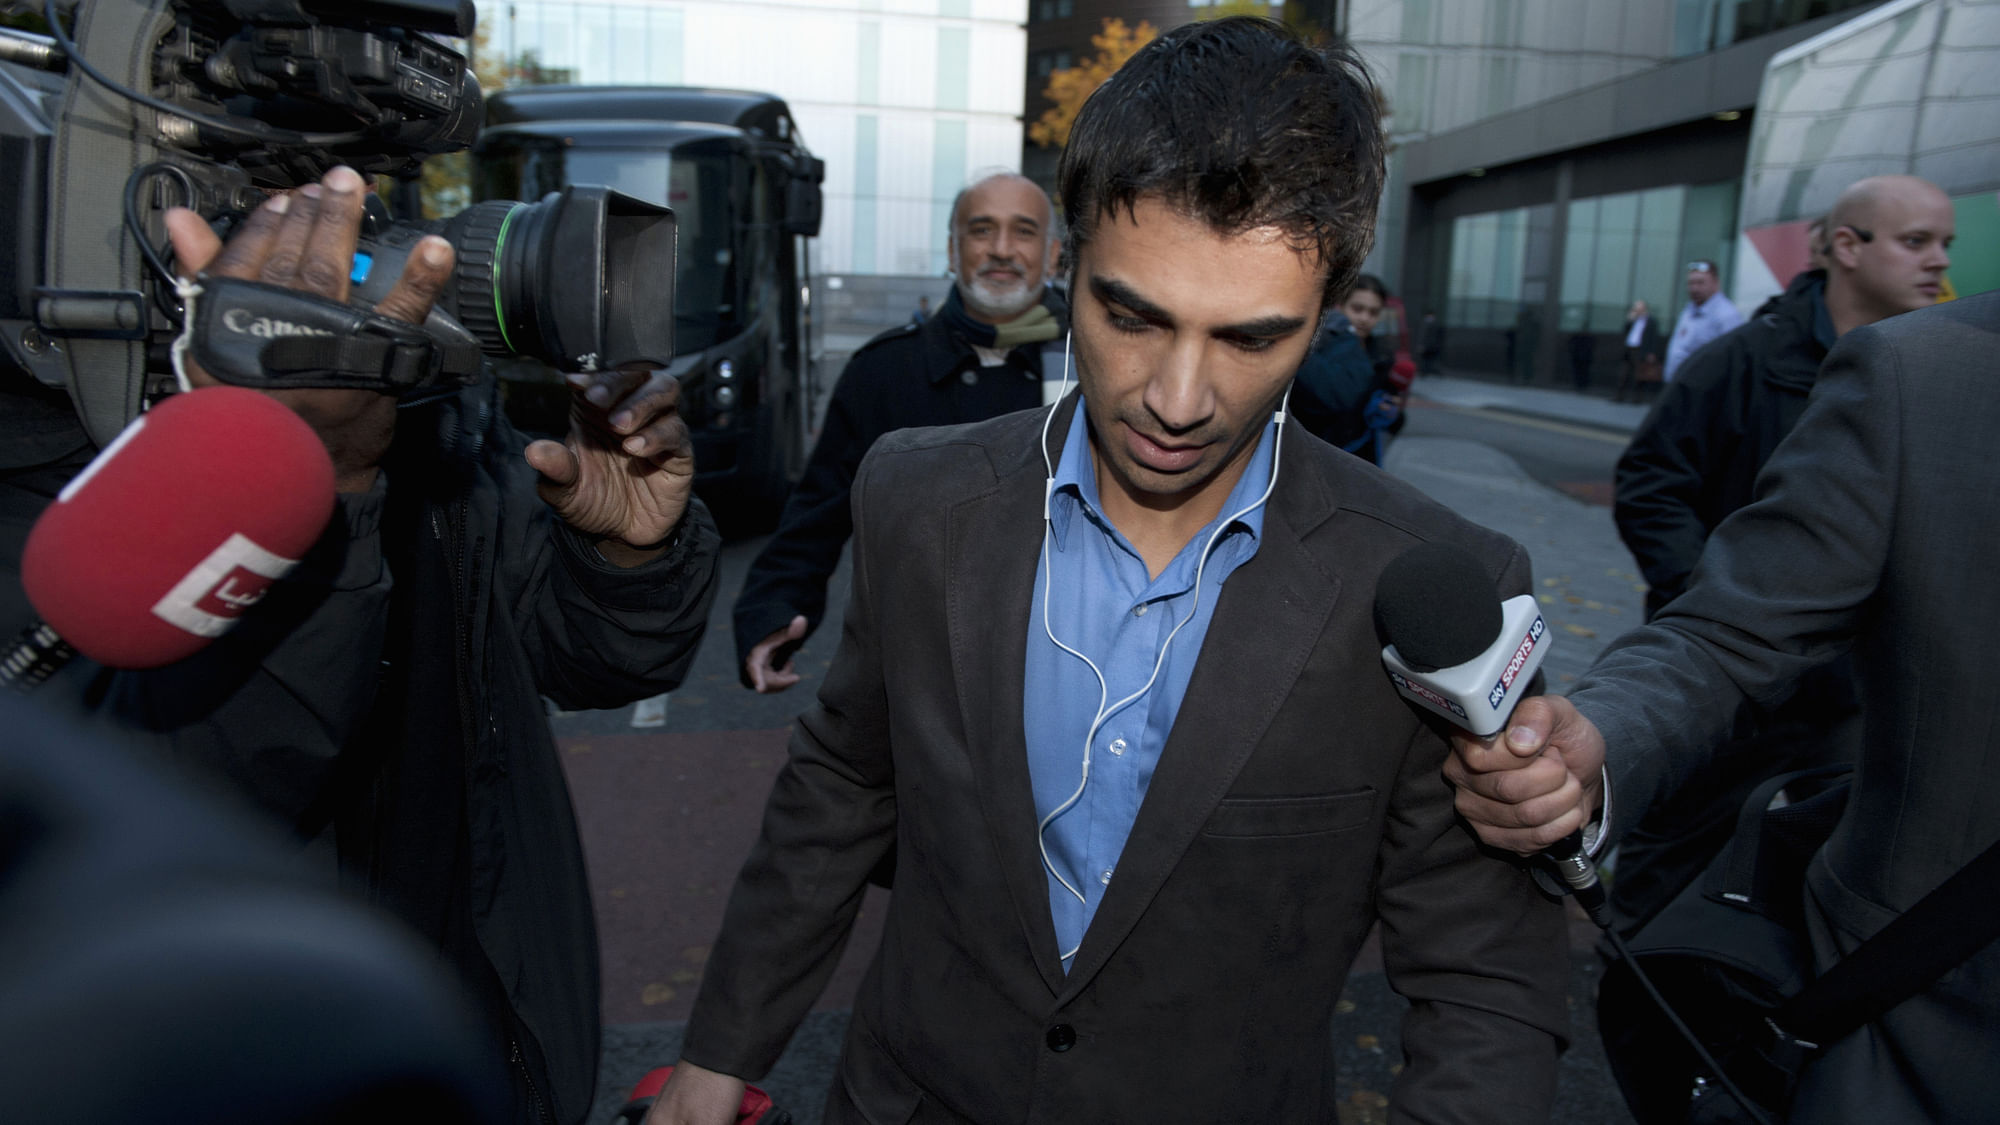 Salman Butt leaves the Southwark Crown court after being found guilty of spot-fixing in London in November, 2011. (Photo: Reuters)